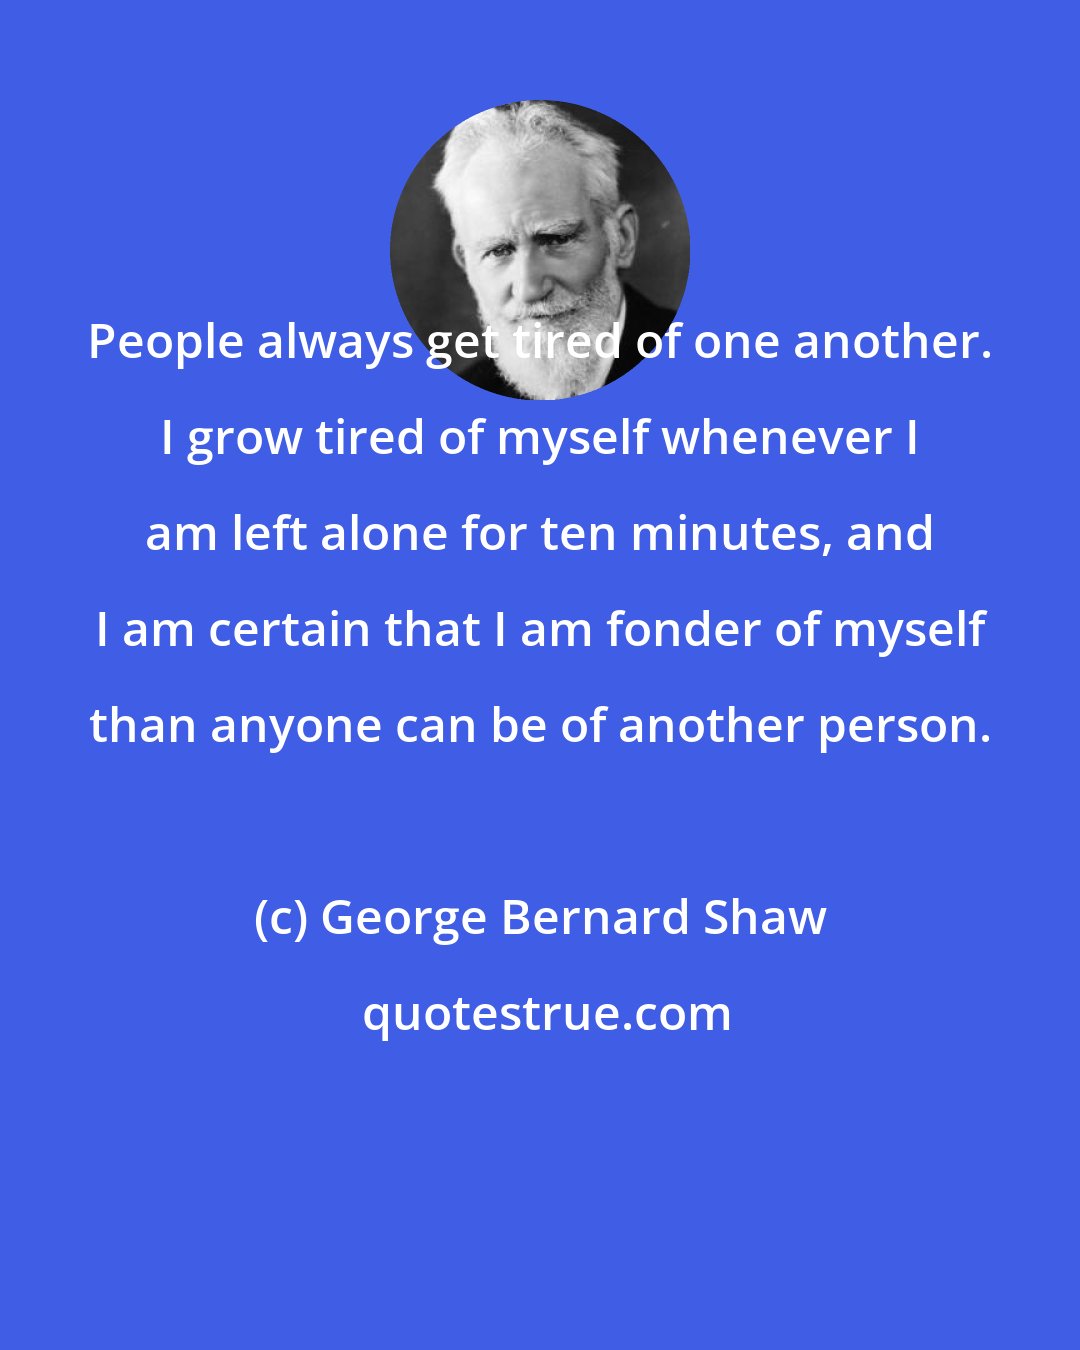 George Bernard Shaw: People always get tired of one another. I grow tired of myself whenever I am left alone for ten minutes, and I am certain that I am fonder of myself than anyone can be of another person.